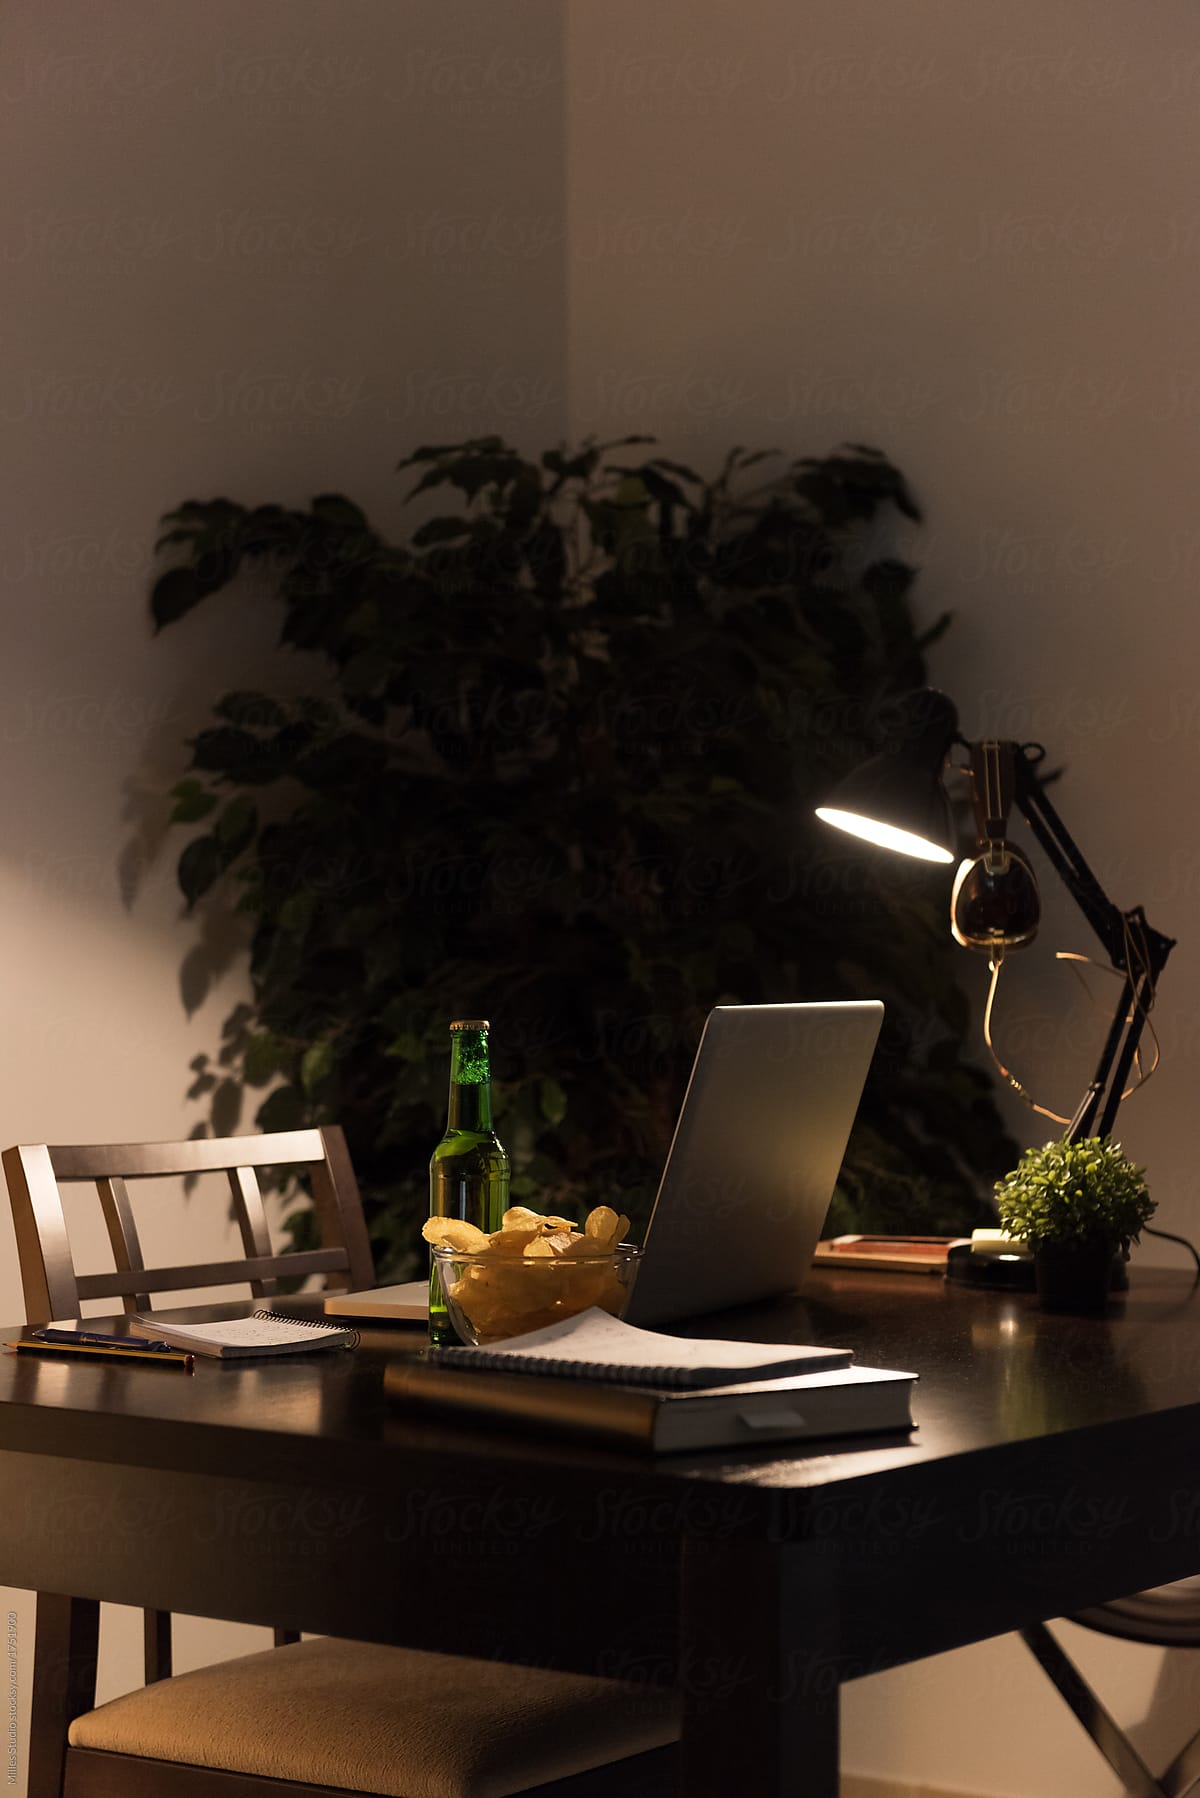 Lamp illuminating table with snacks and laptop